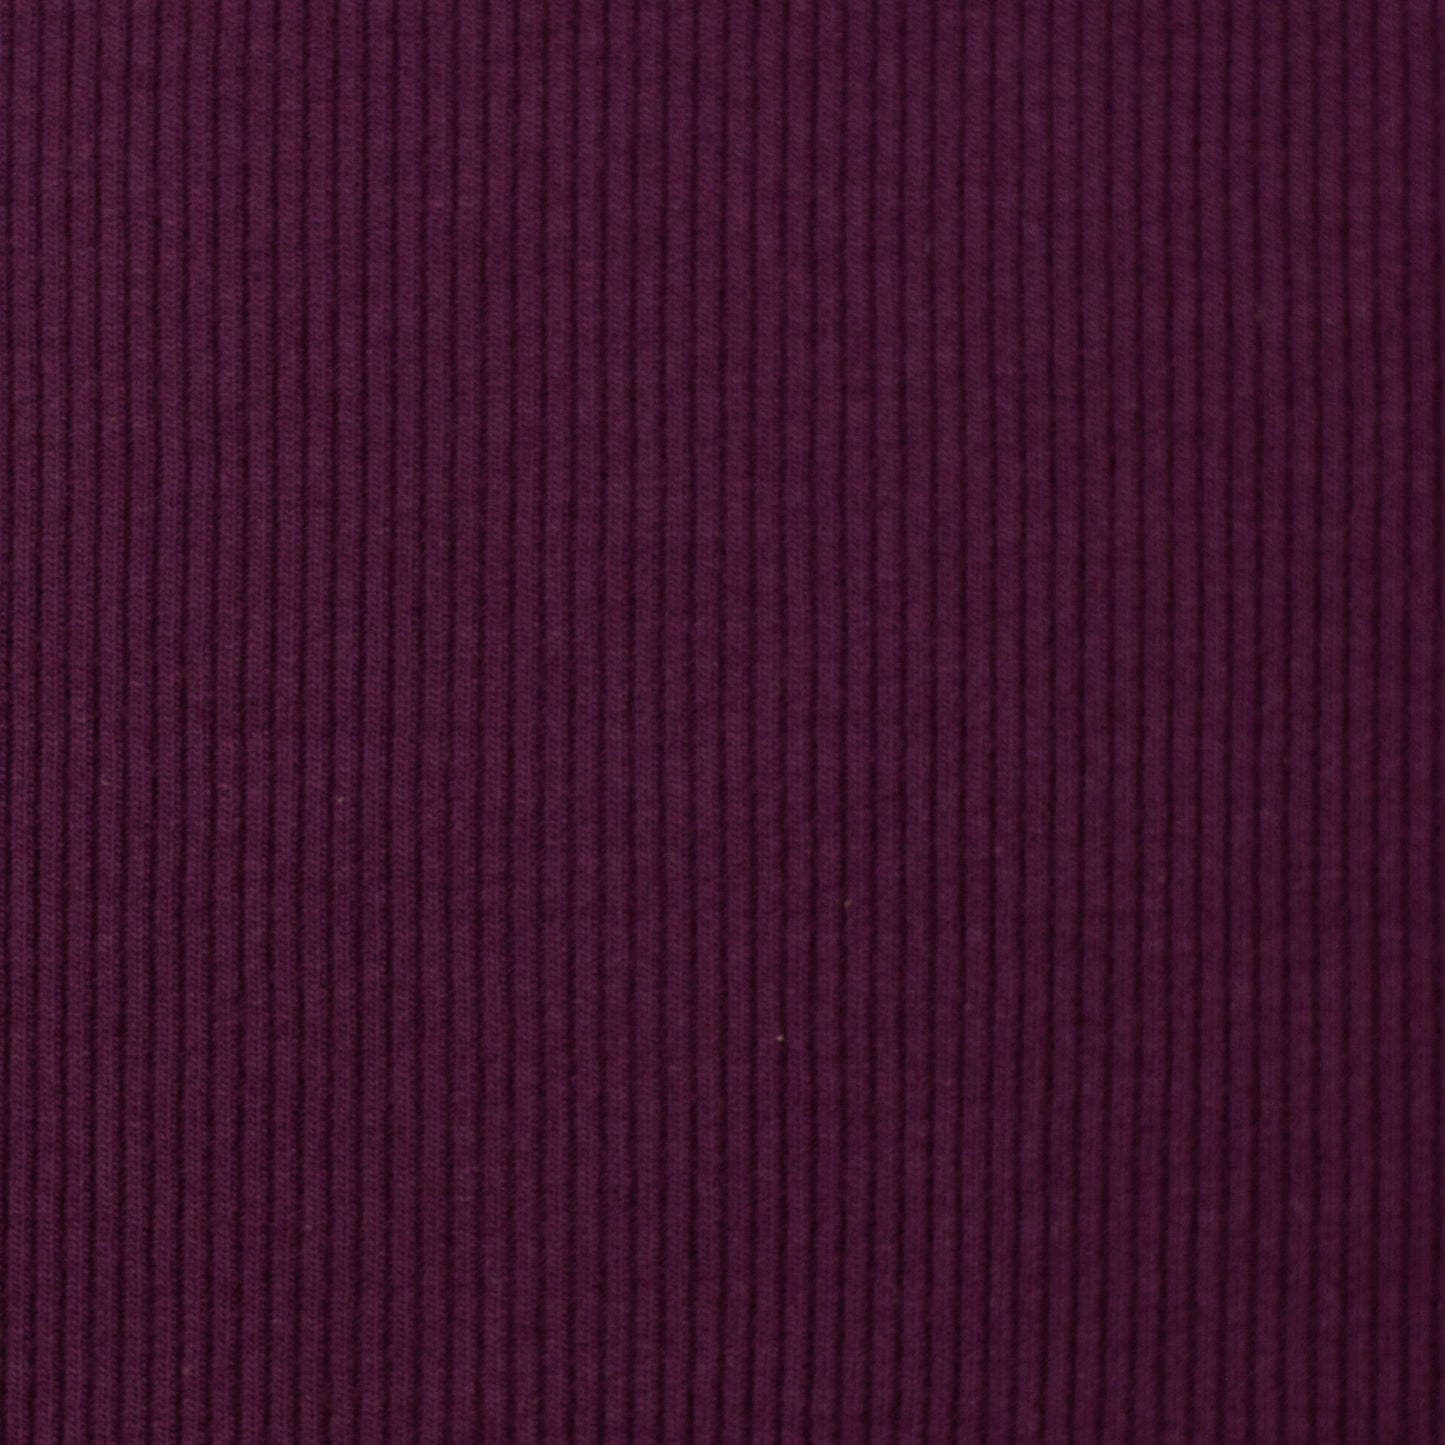 Swafing - Bordeaux - In Stock in Rib Knit, Fleeced French Terry - Available by Preorder in Euro Ribbing, Jersey, French Terry, Waffle - Little Rhody Sewing Co.